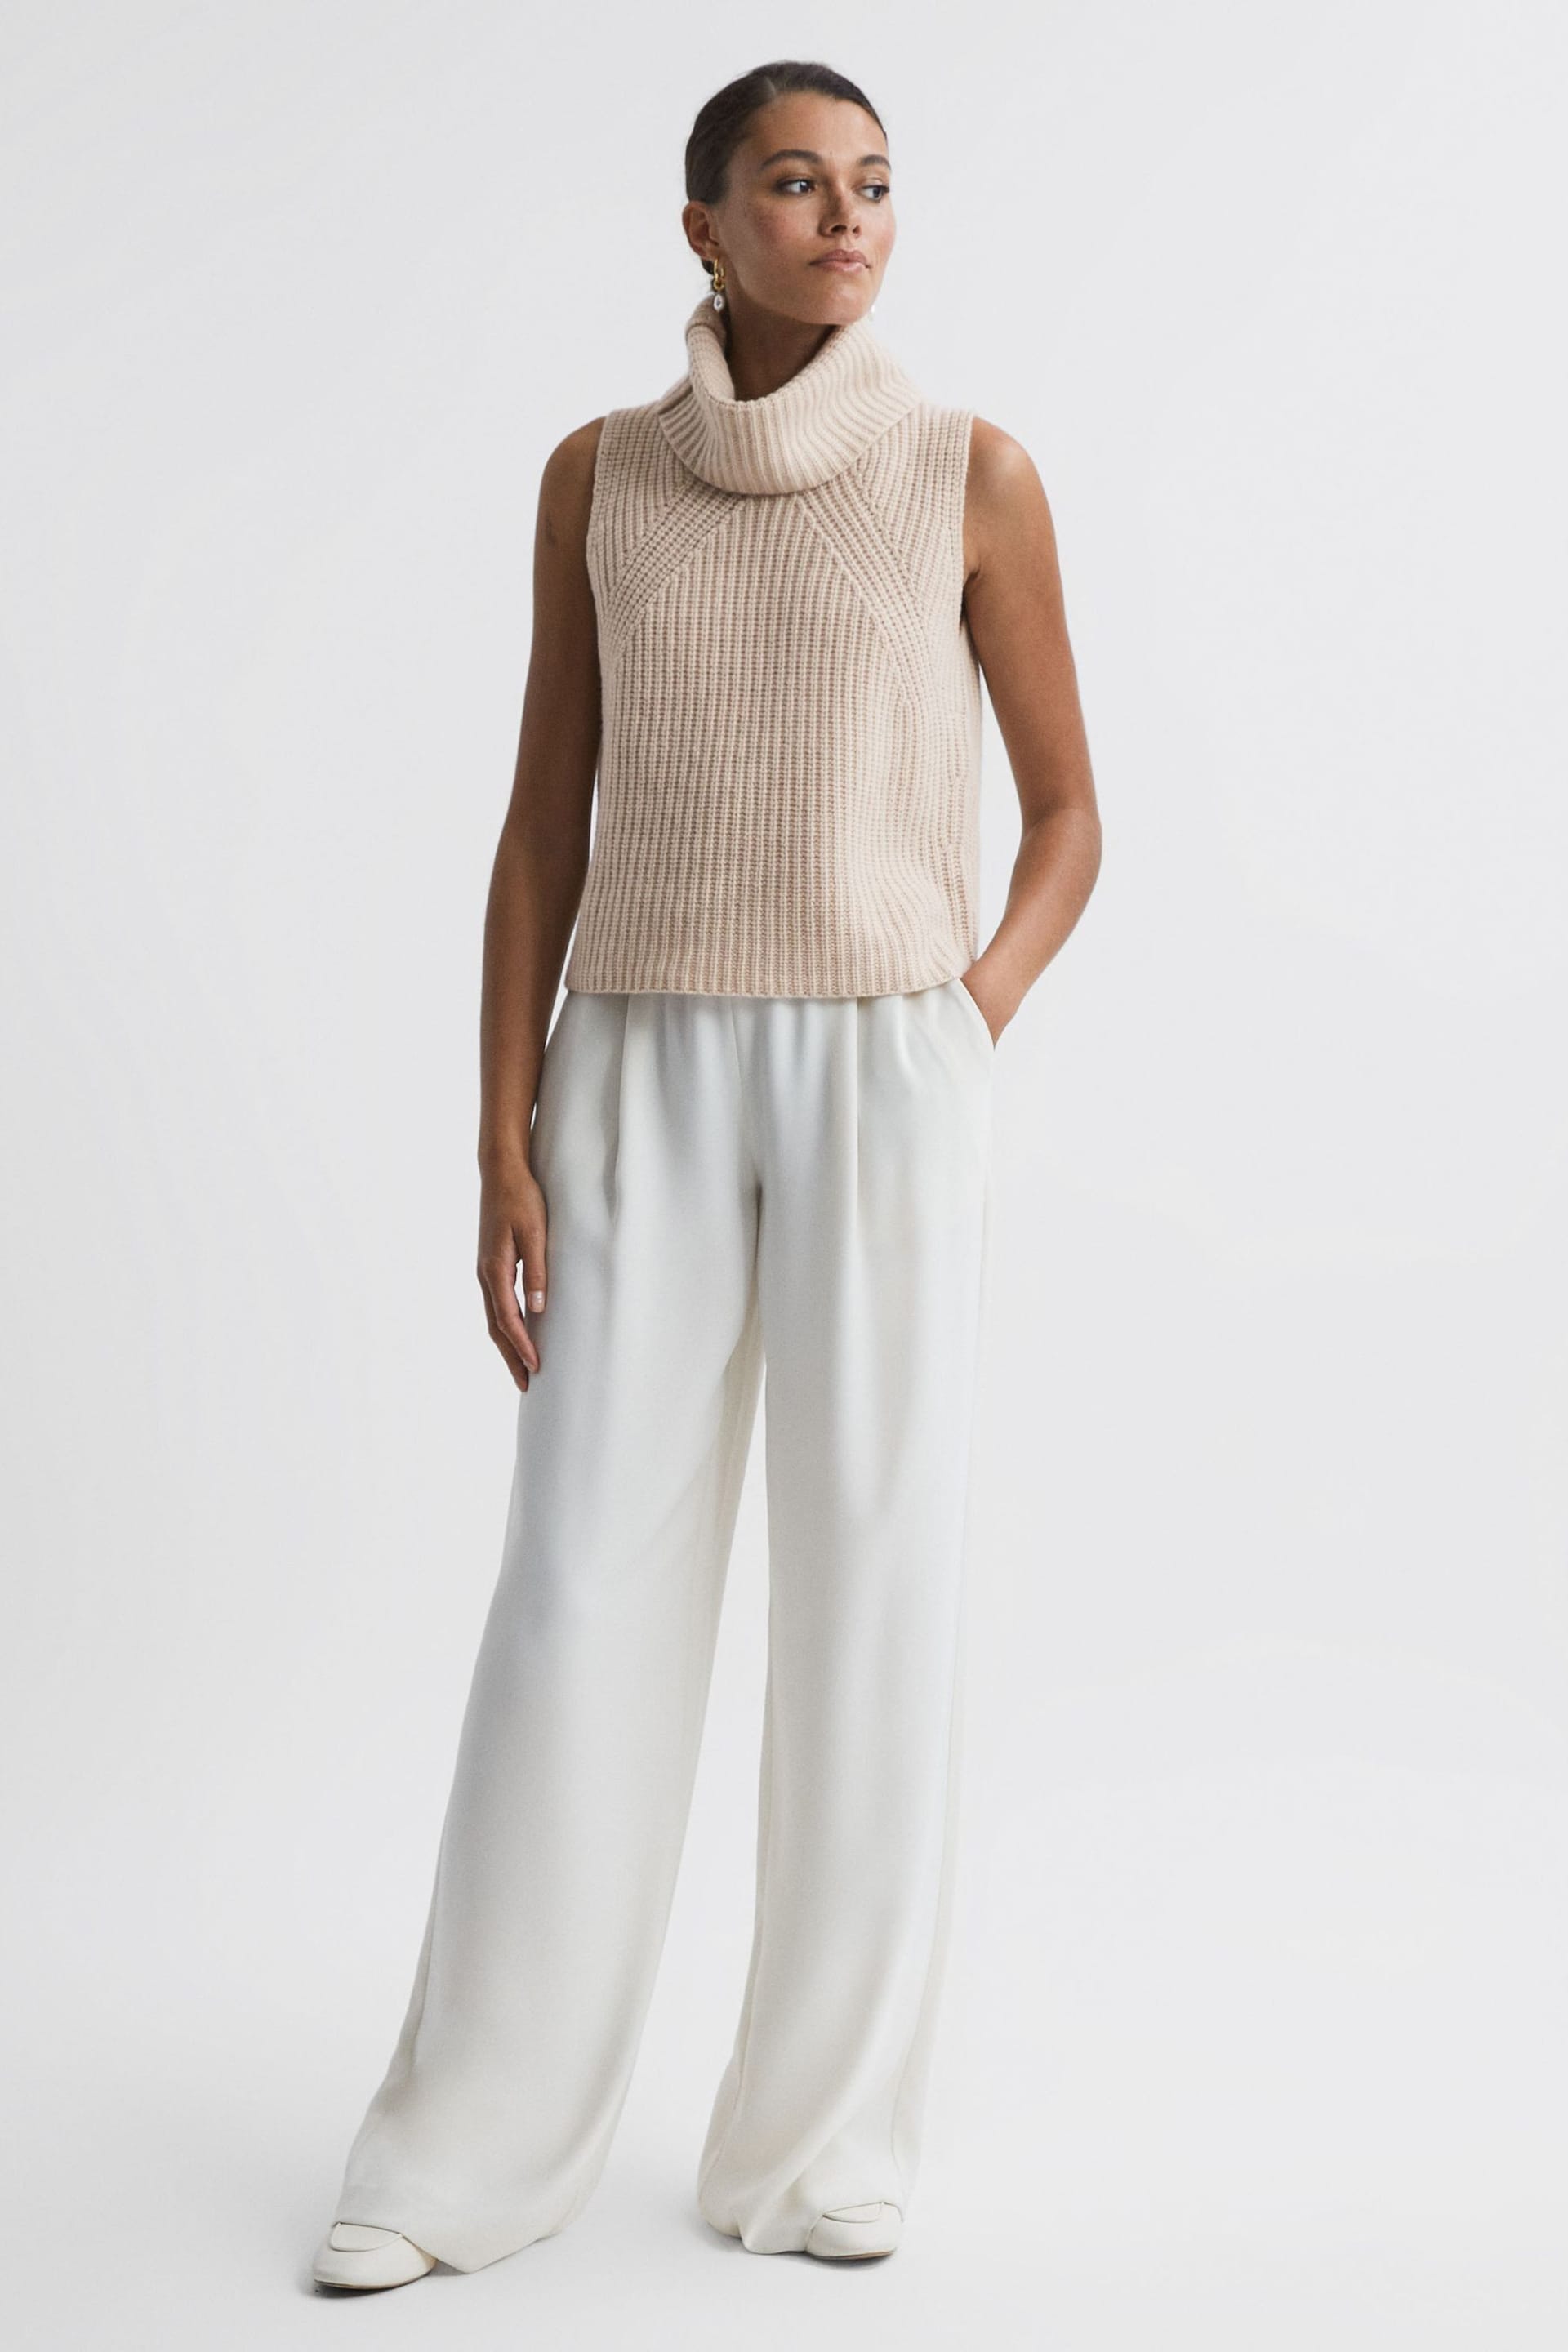 Reiss Neutral Kasha Wool-Cashmere Sleeveless Removable Roll Neck Vest - Image 4 of 7